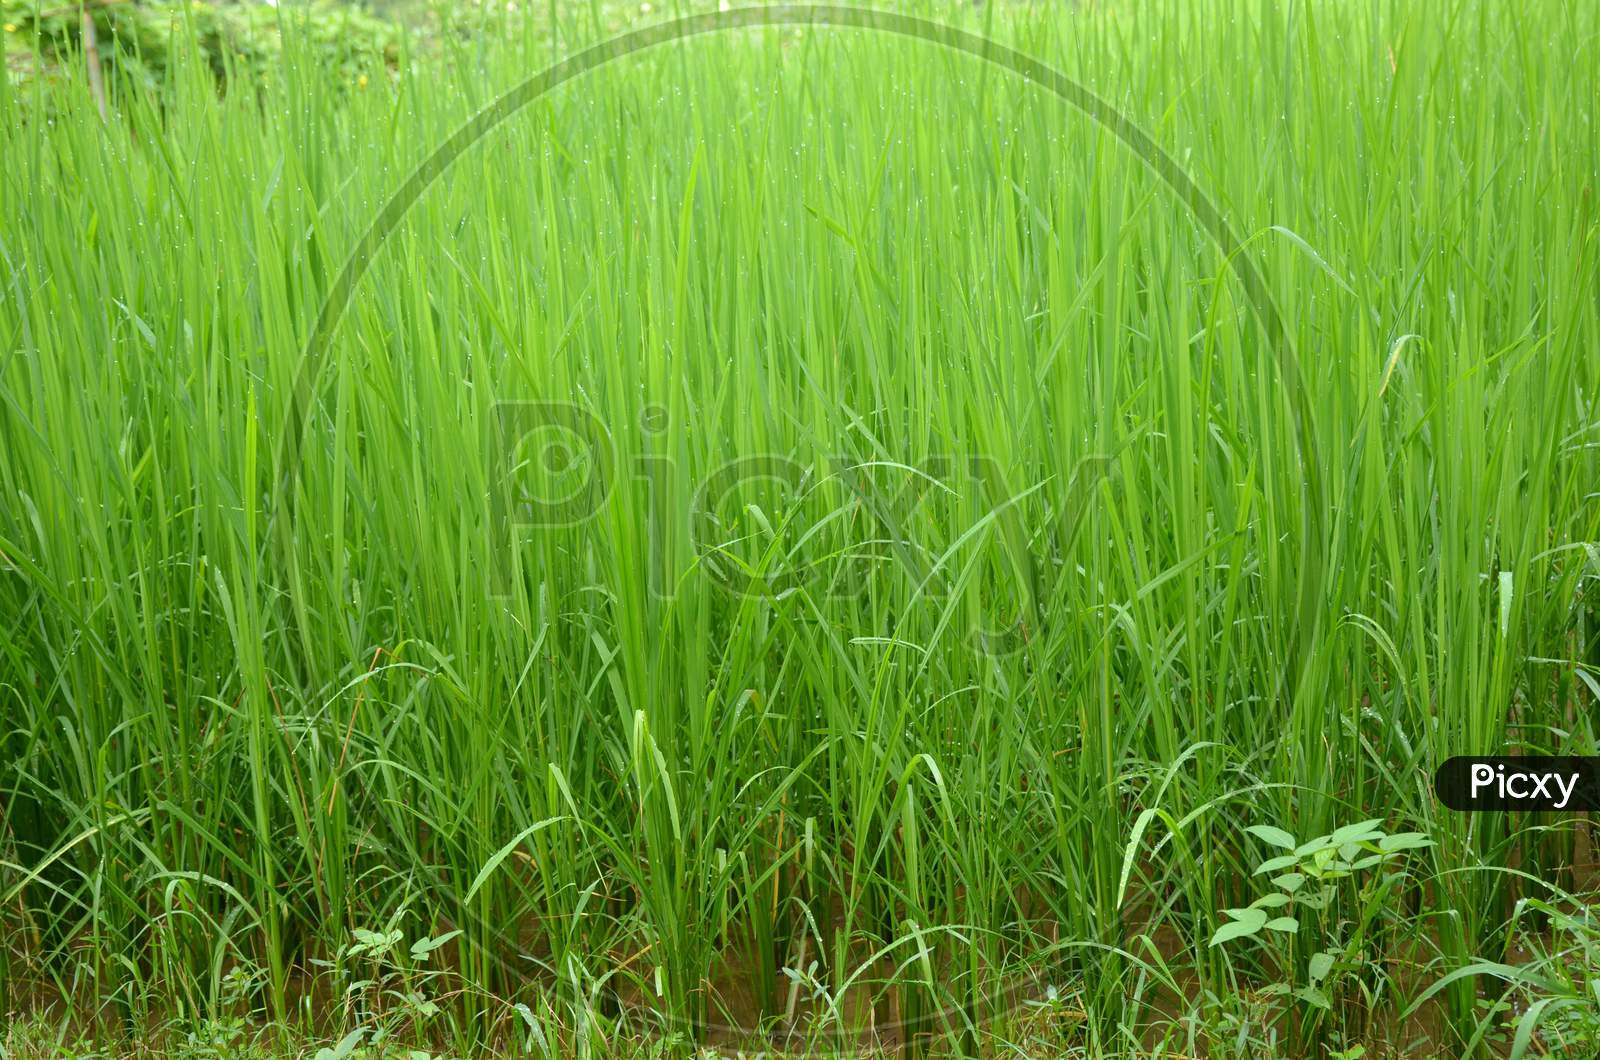 The Green Paddy Plant Seedlings In The Water Field